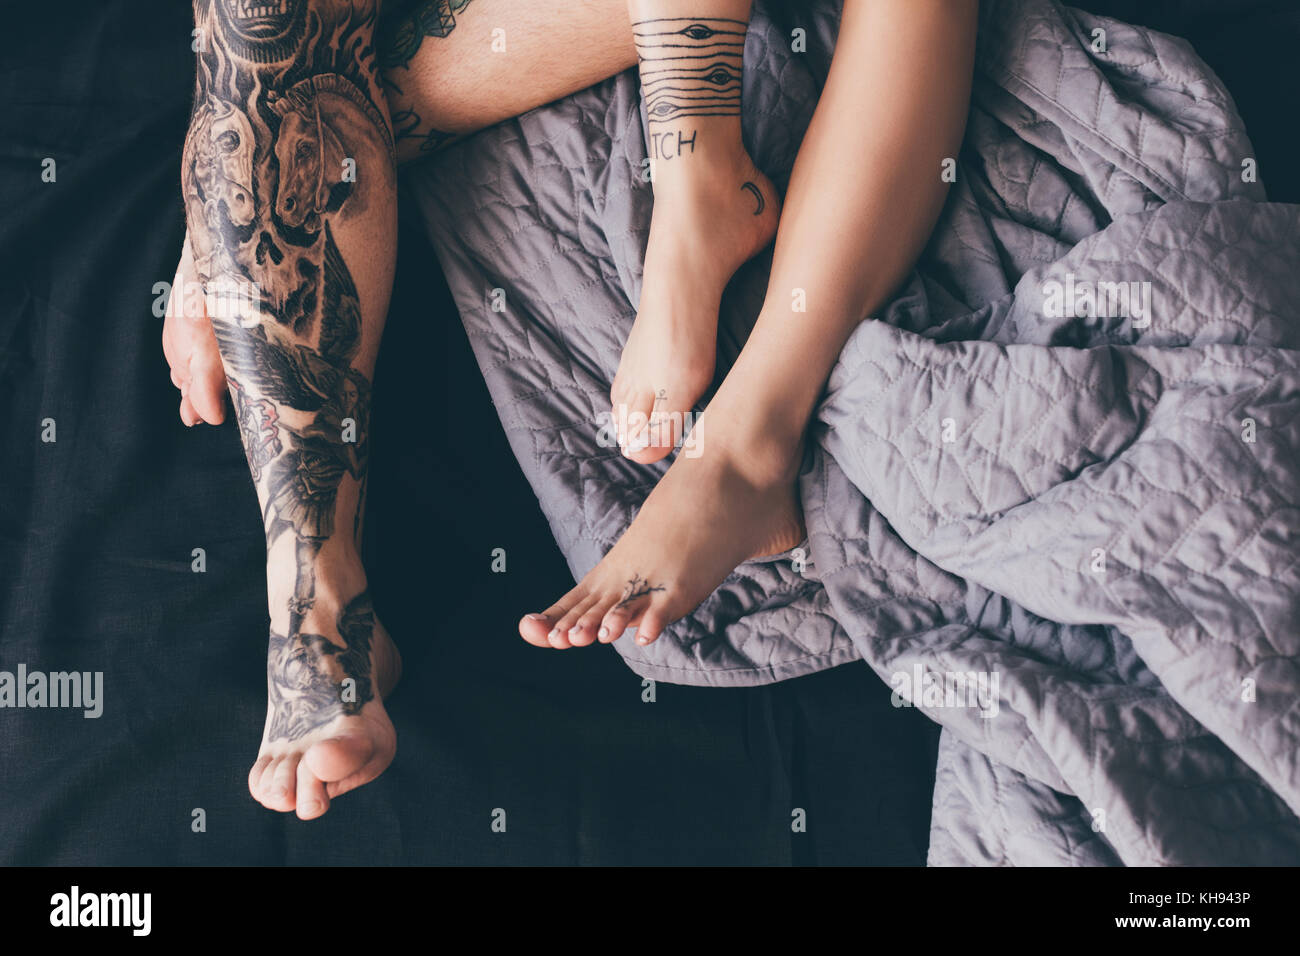 Tattooed couple in bed Banque D'Images